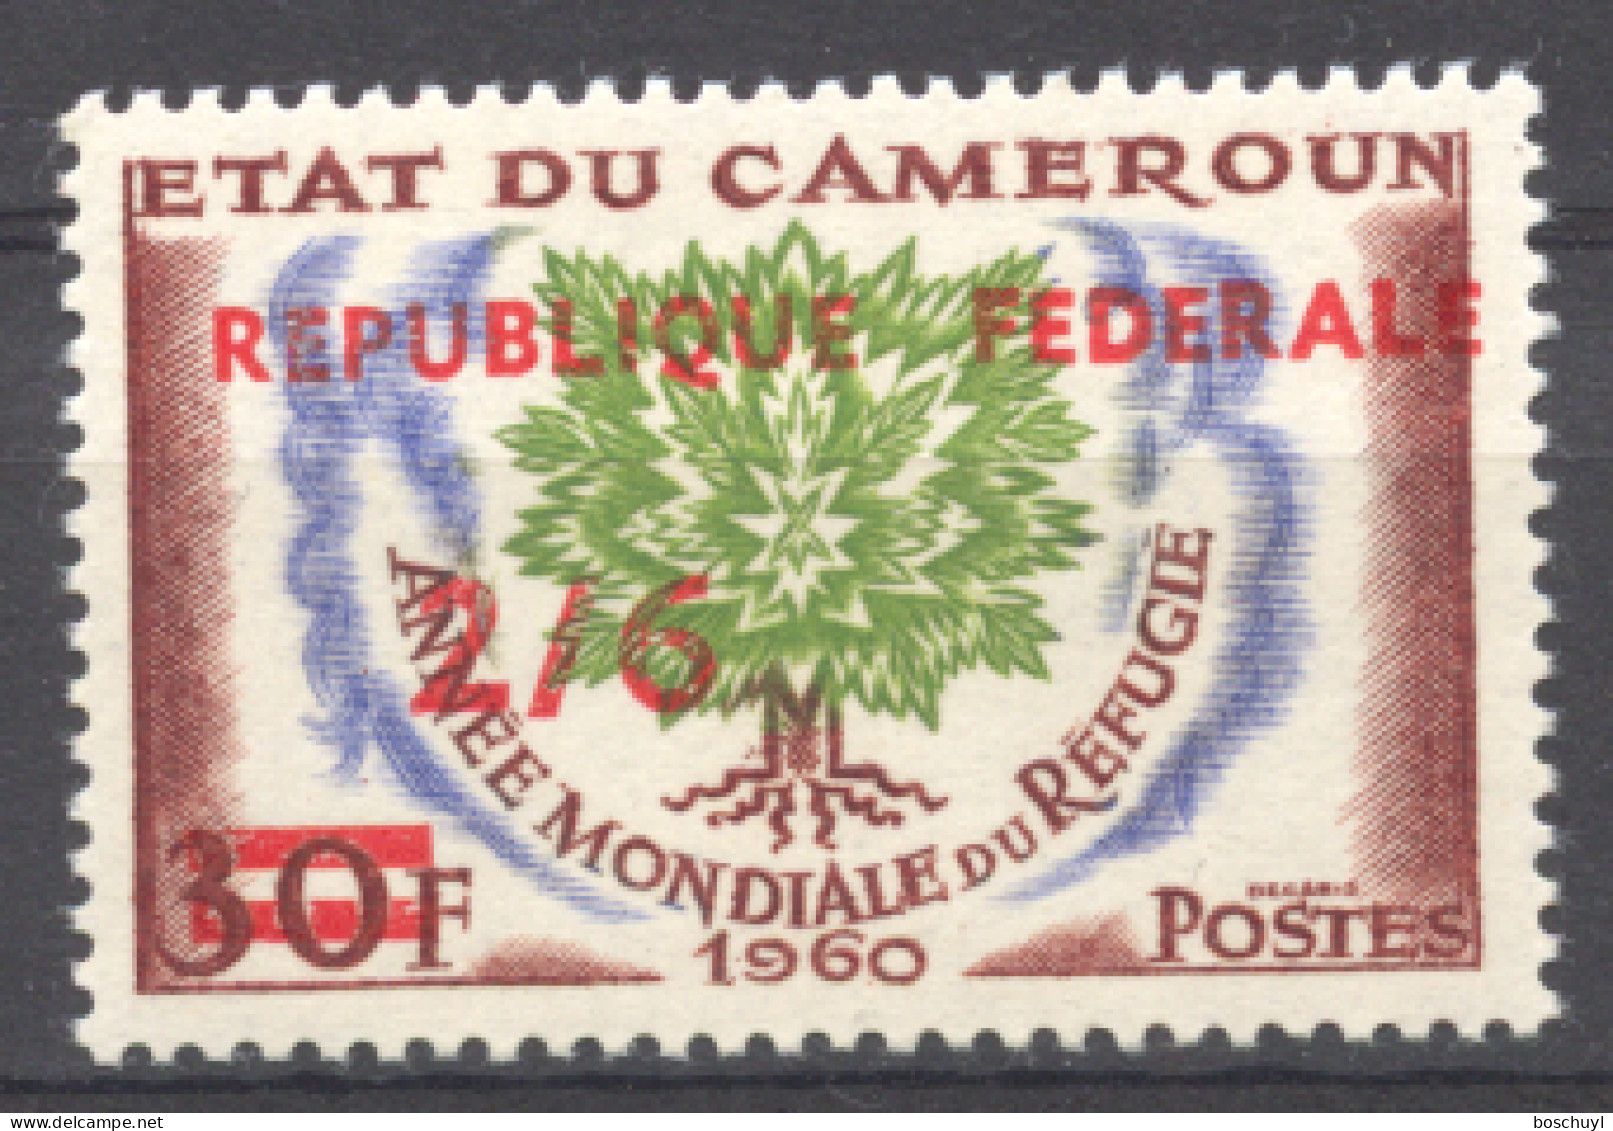 Cameroon, UKTT, 1960, World Refugee Year, WRY, United Nations, Overprinted And Revalued, MNH, Michel 21 Type II - Refugiados